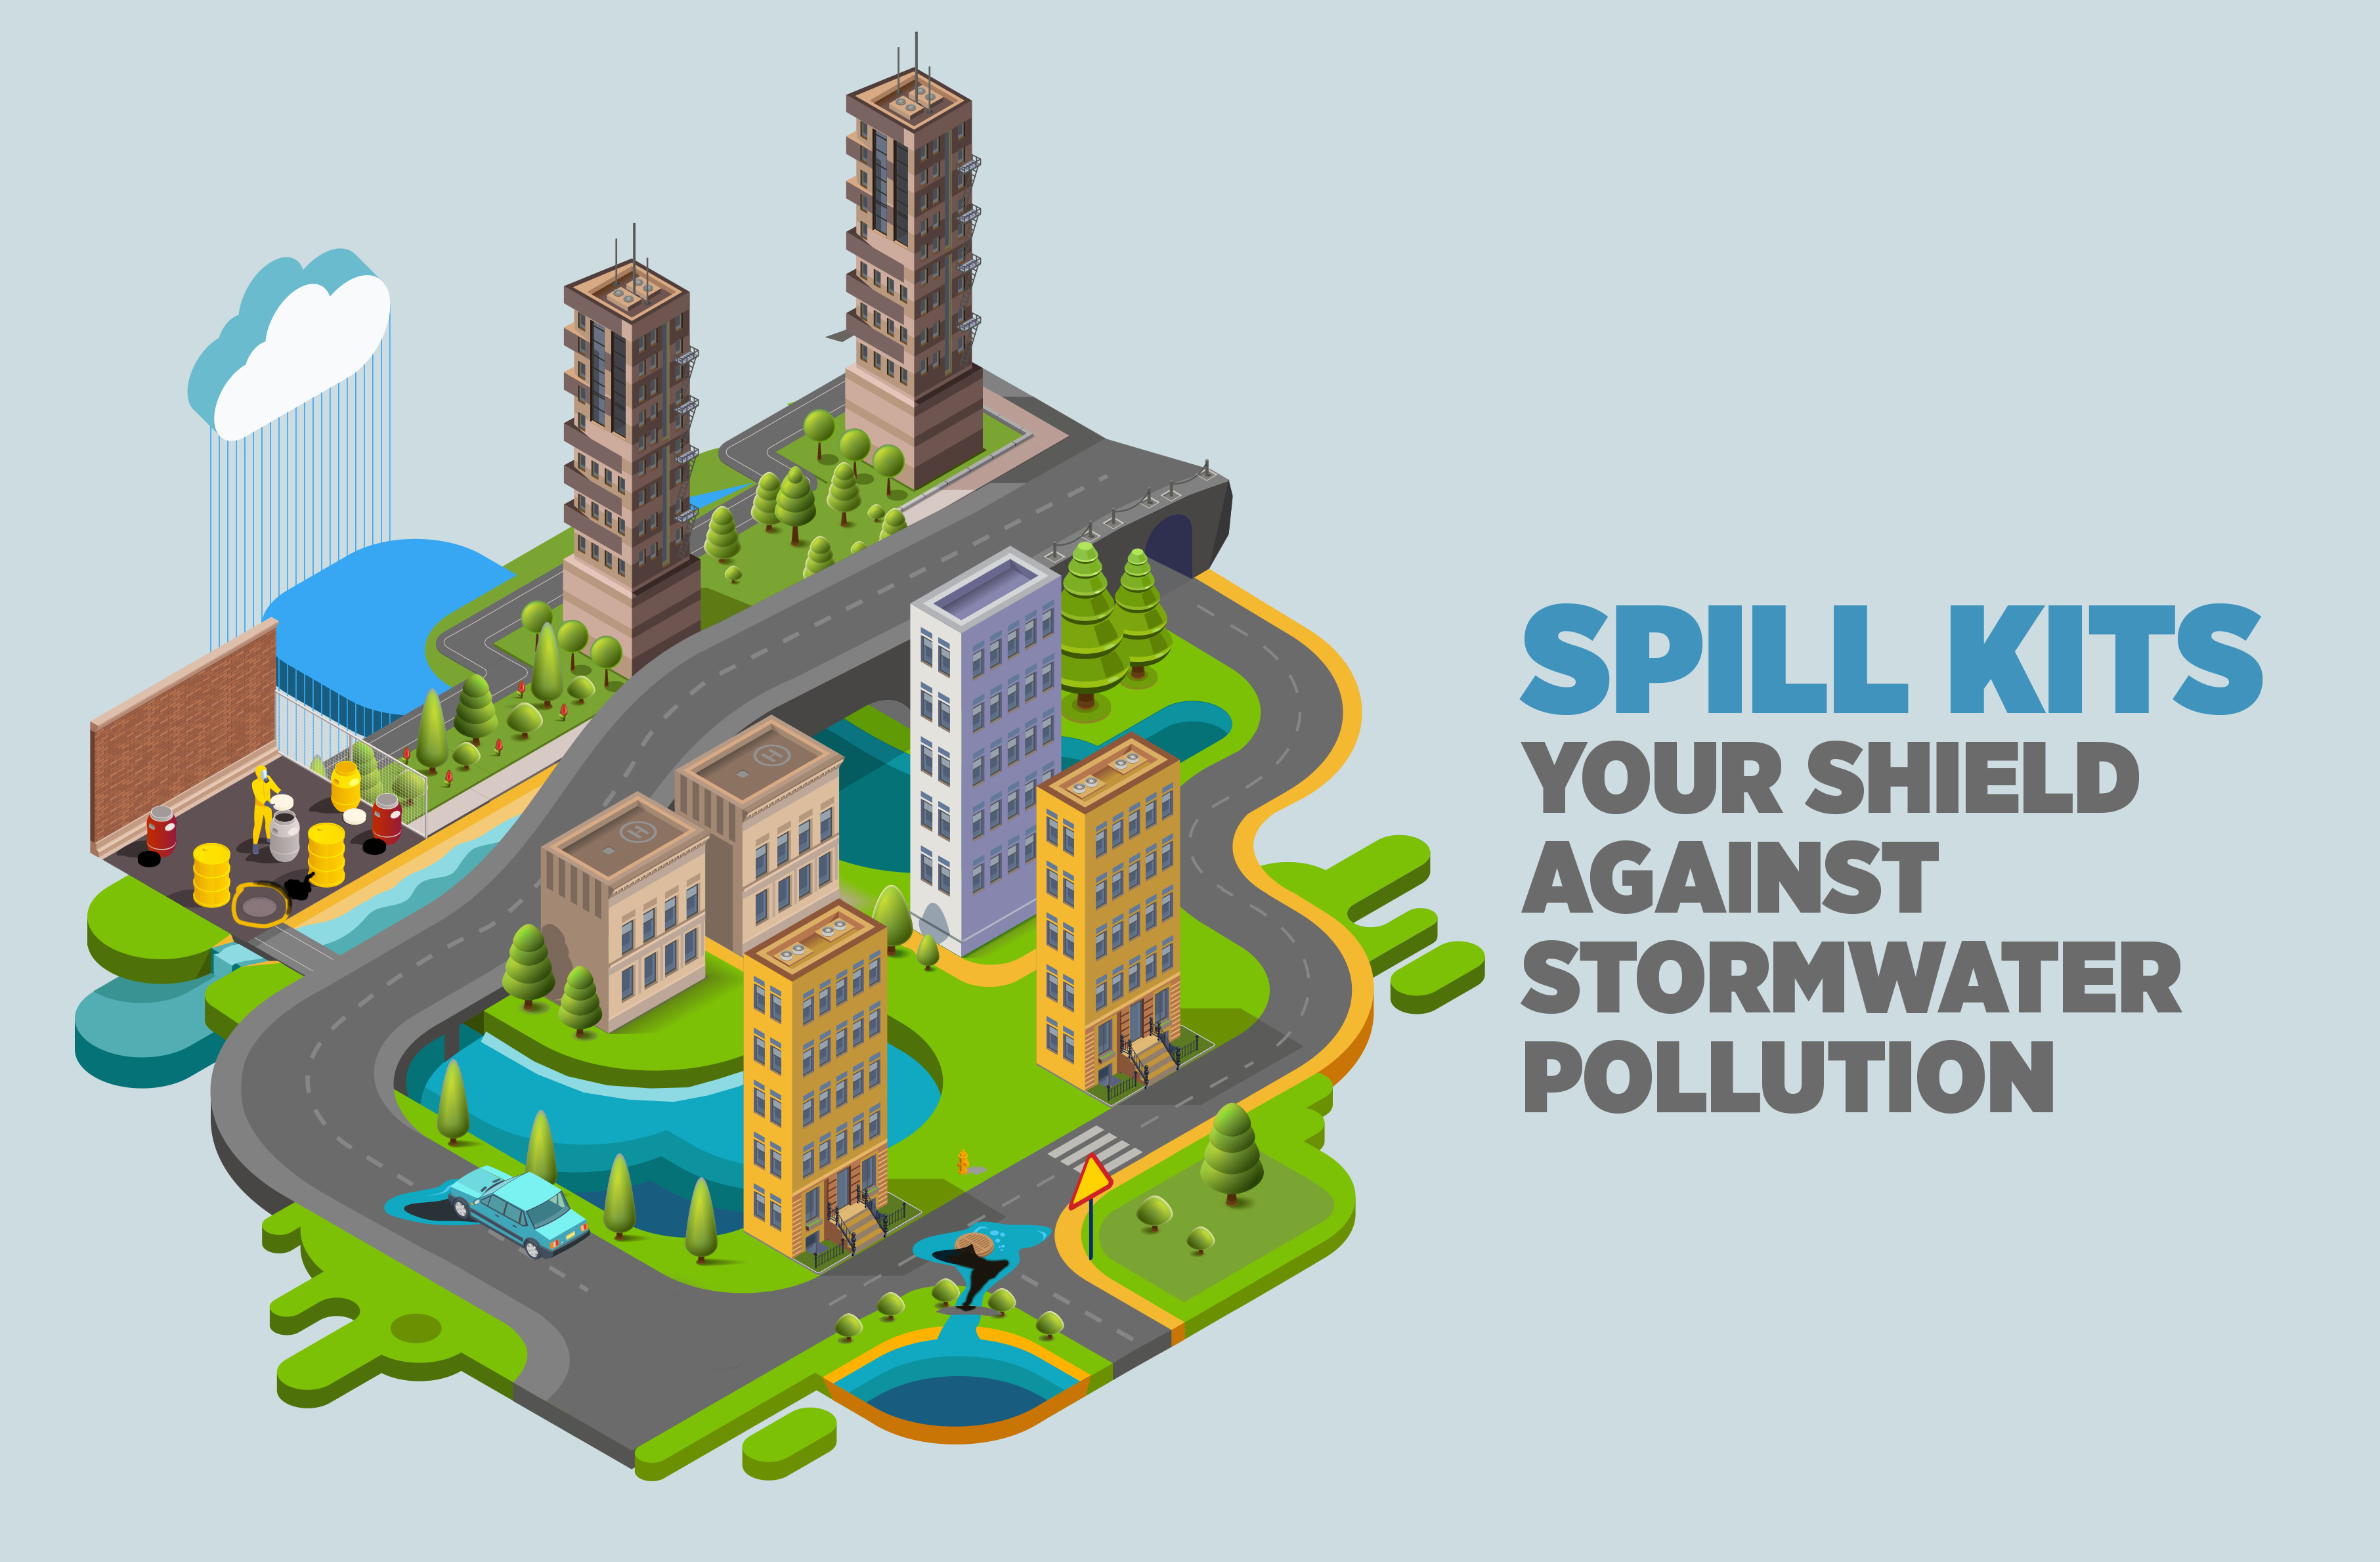 Spills and their effect on stormwater pollution - best practices for prevention